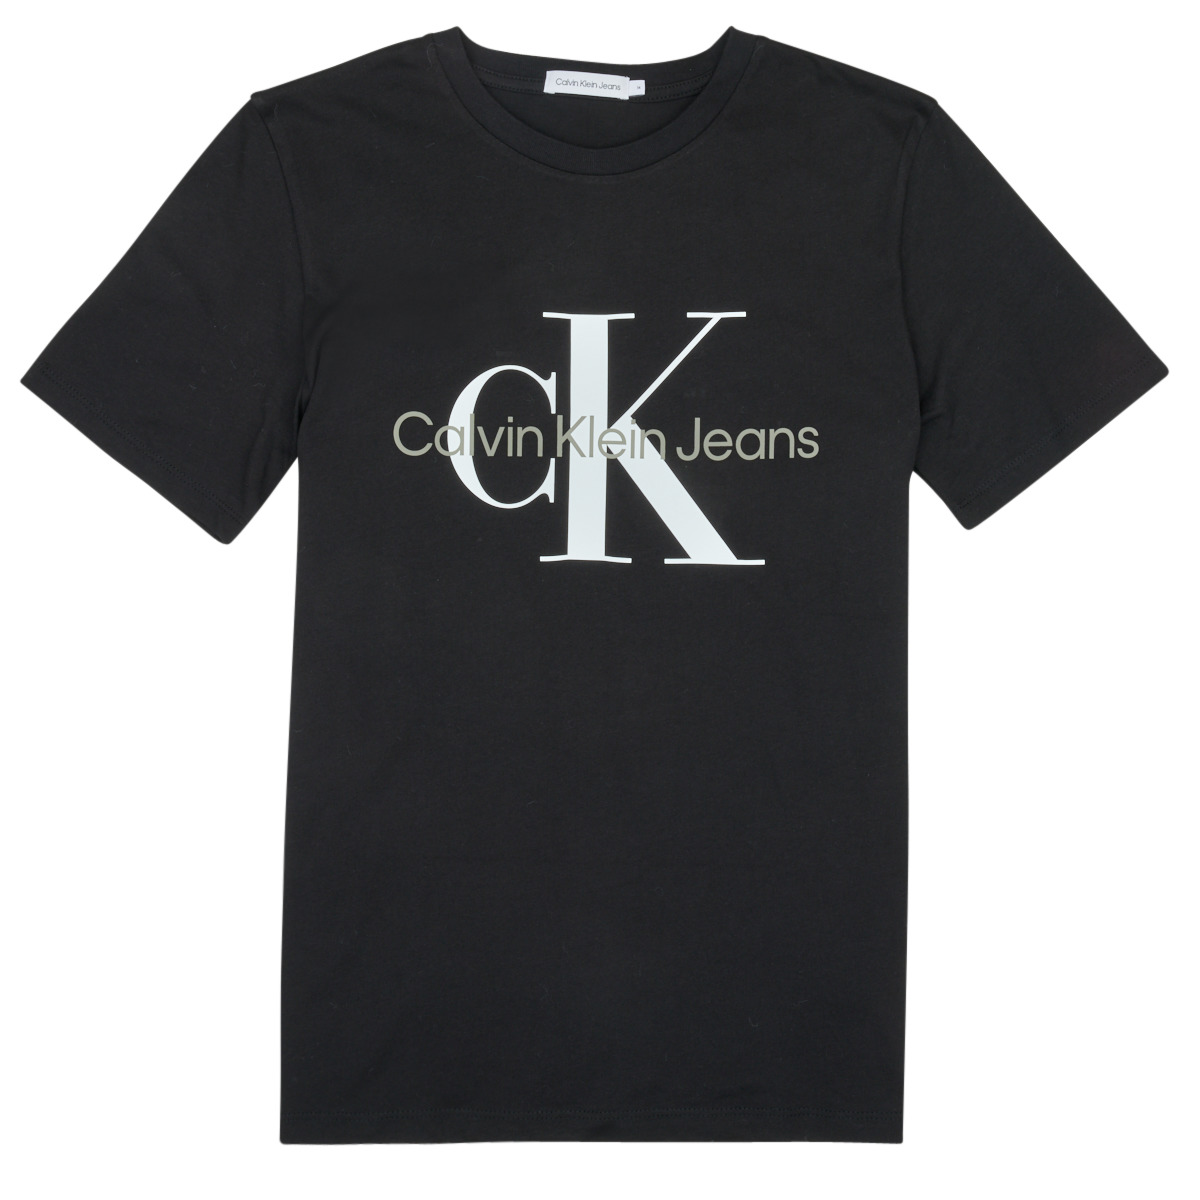 Calvin Klein Jeans MONOGRAM LOGO T-SHIRT Black - Free delivery | Spartoo  NET ! - Clothing short-sleeved t-shirts Child